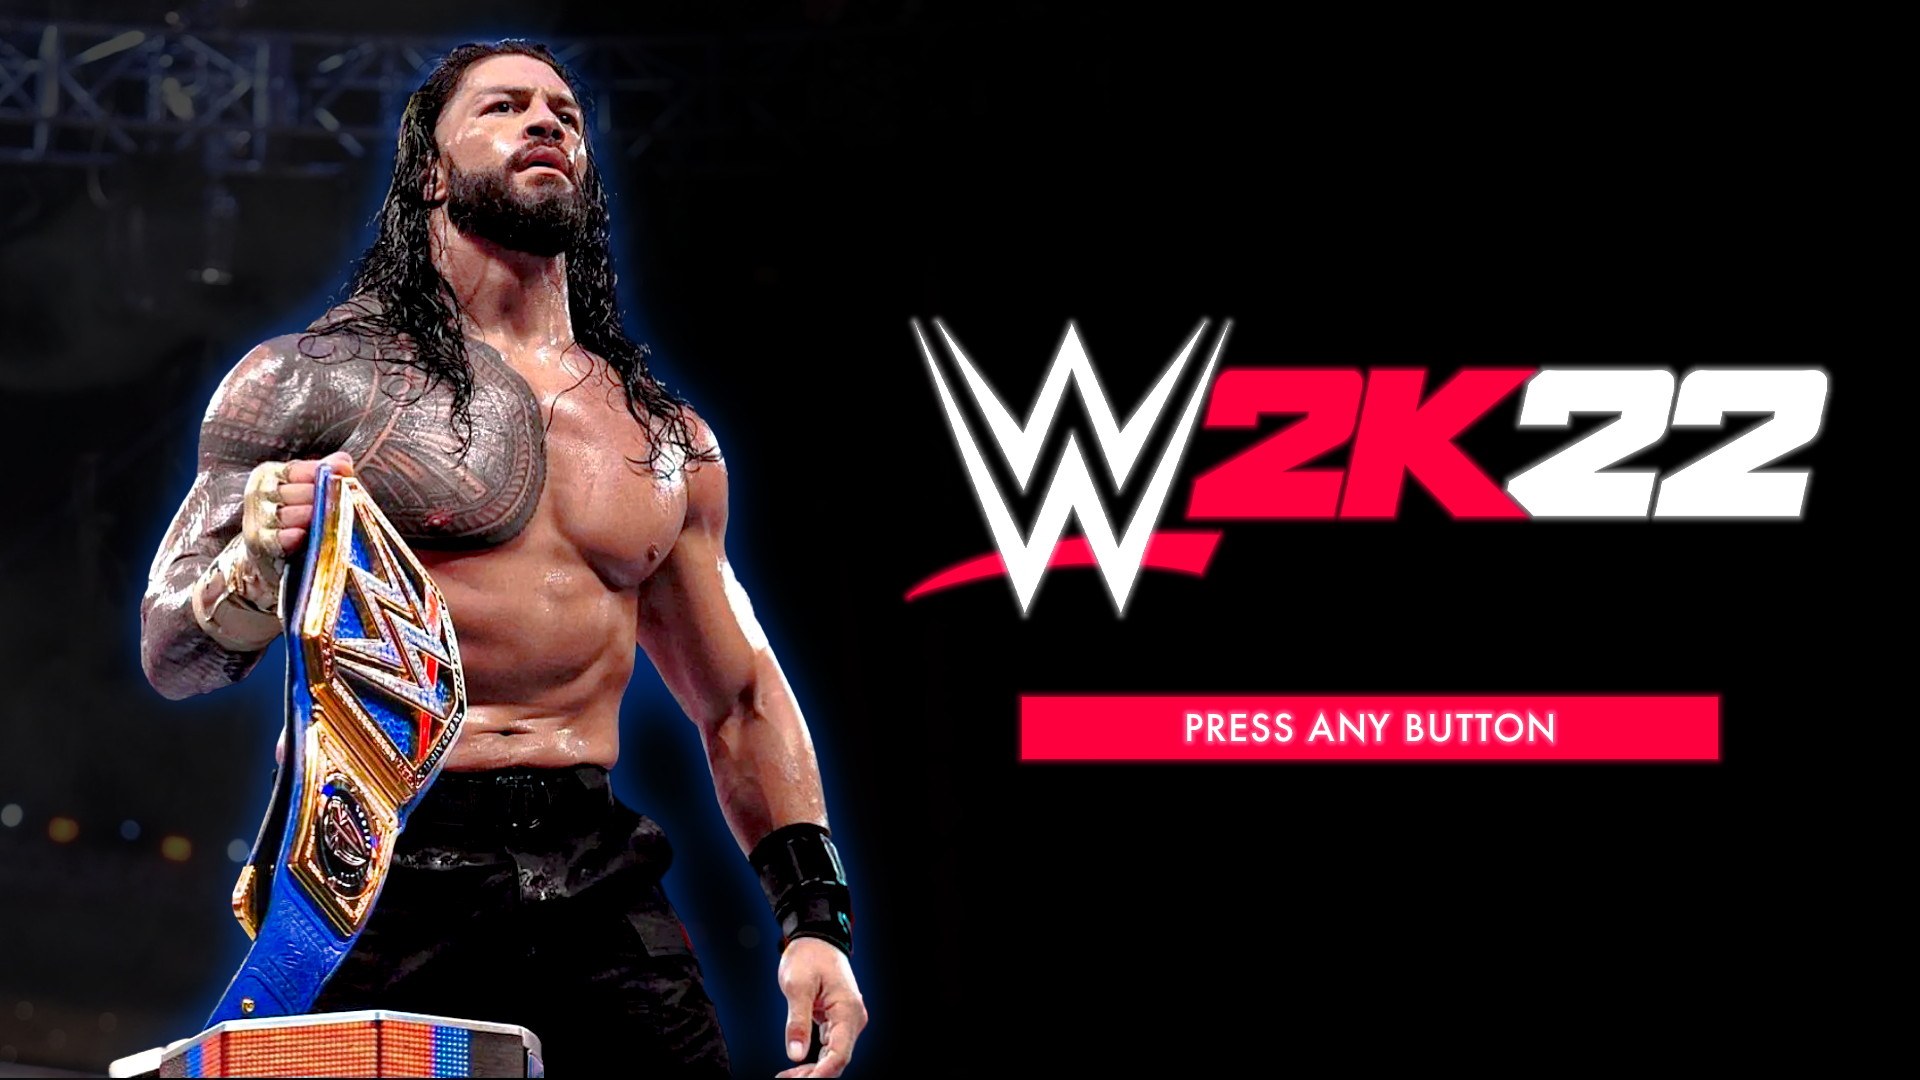 My take on what the WWE 2K22 screens would look like!